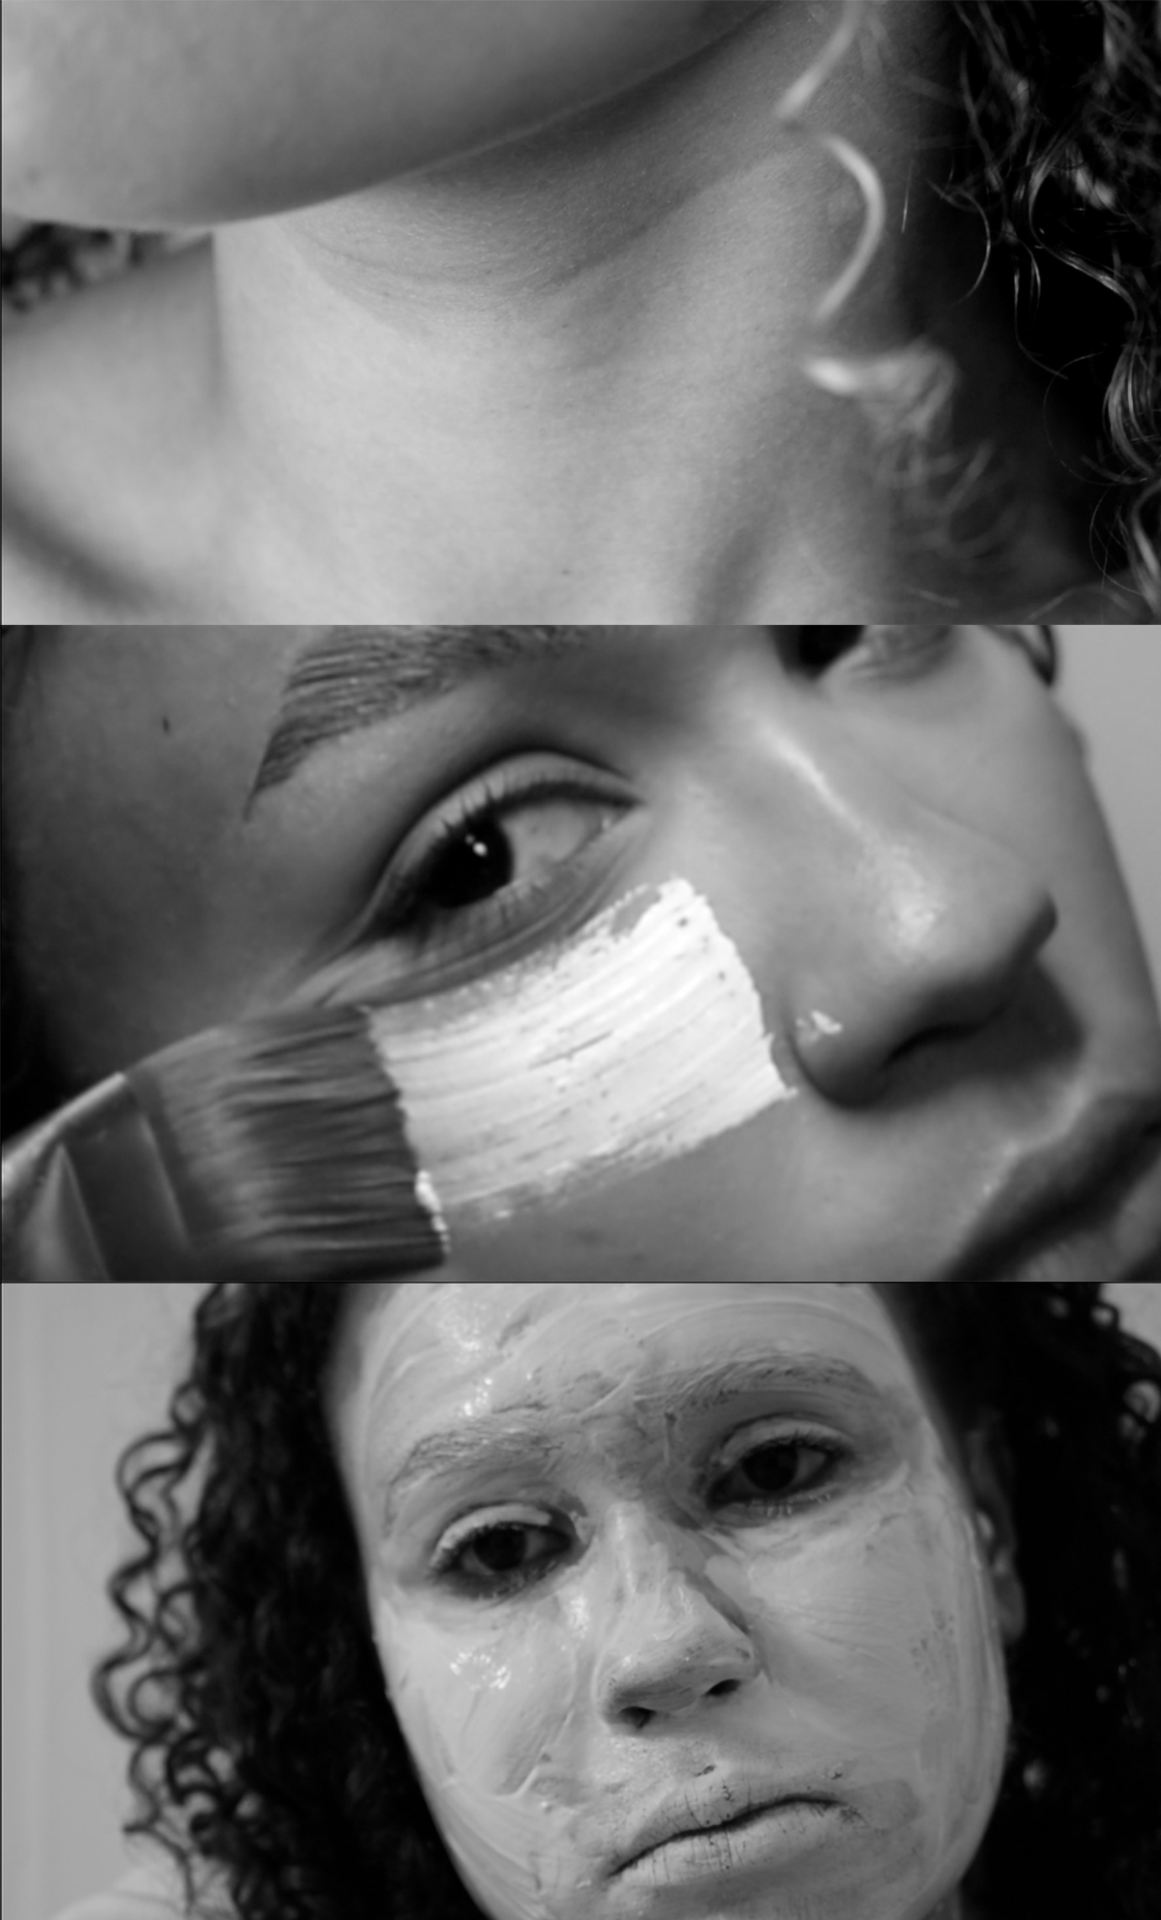 3 greyscale photos in a vertical line: a close up of a neck, a person painting a white line under their right eye, and a person's whole face painted white.